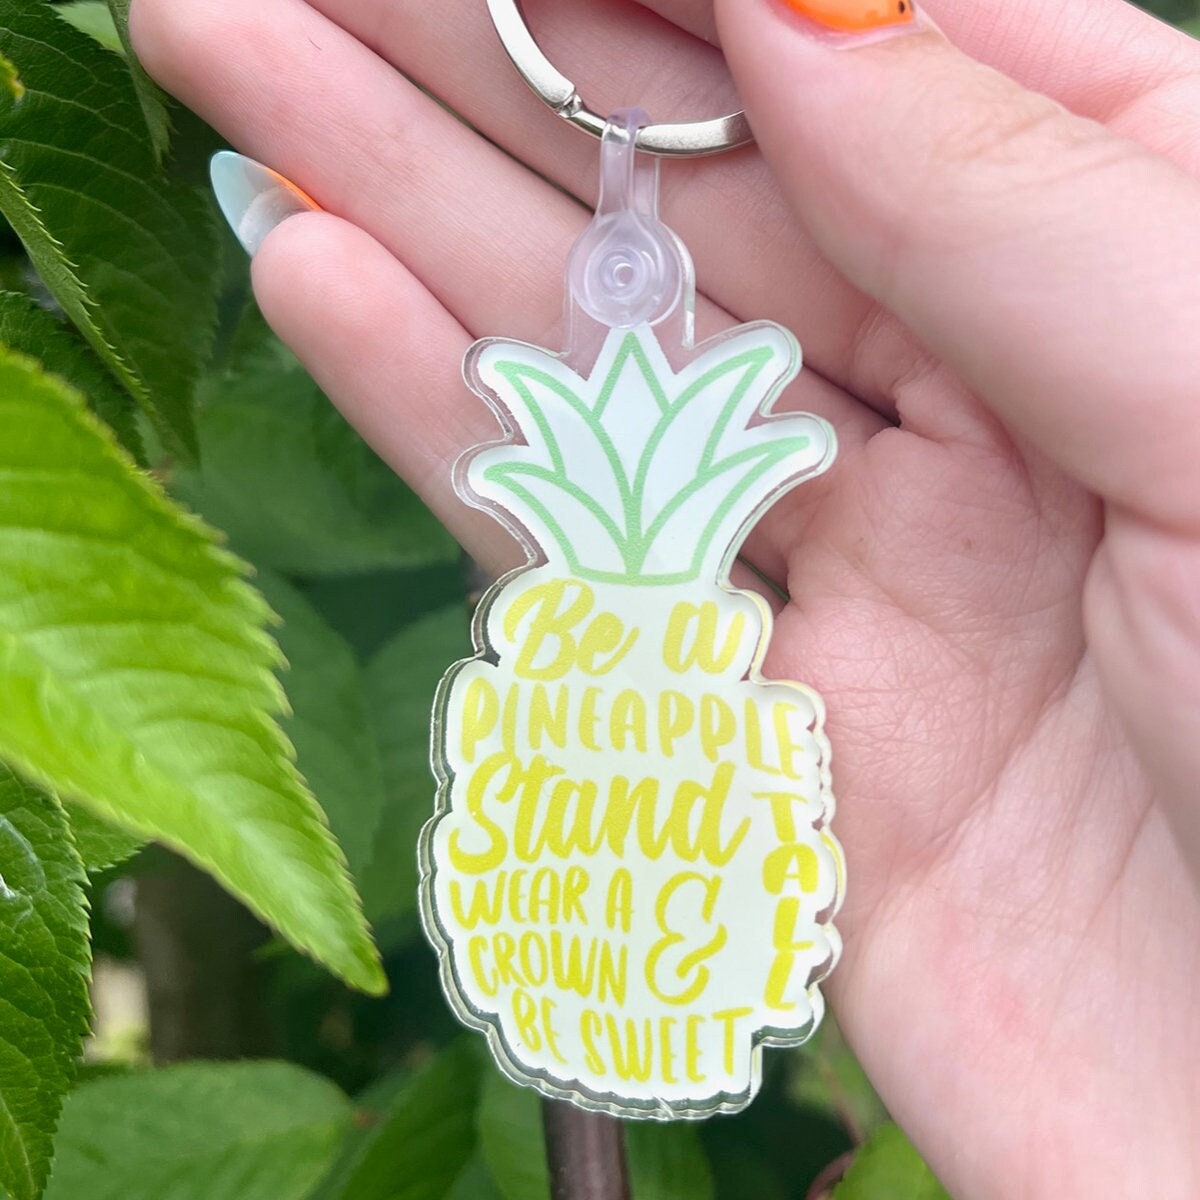 Stand Tall Pineapple Keychain | Positive Keychain | Motivational Keychain | Wear a Crown